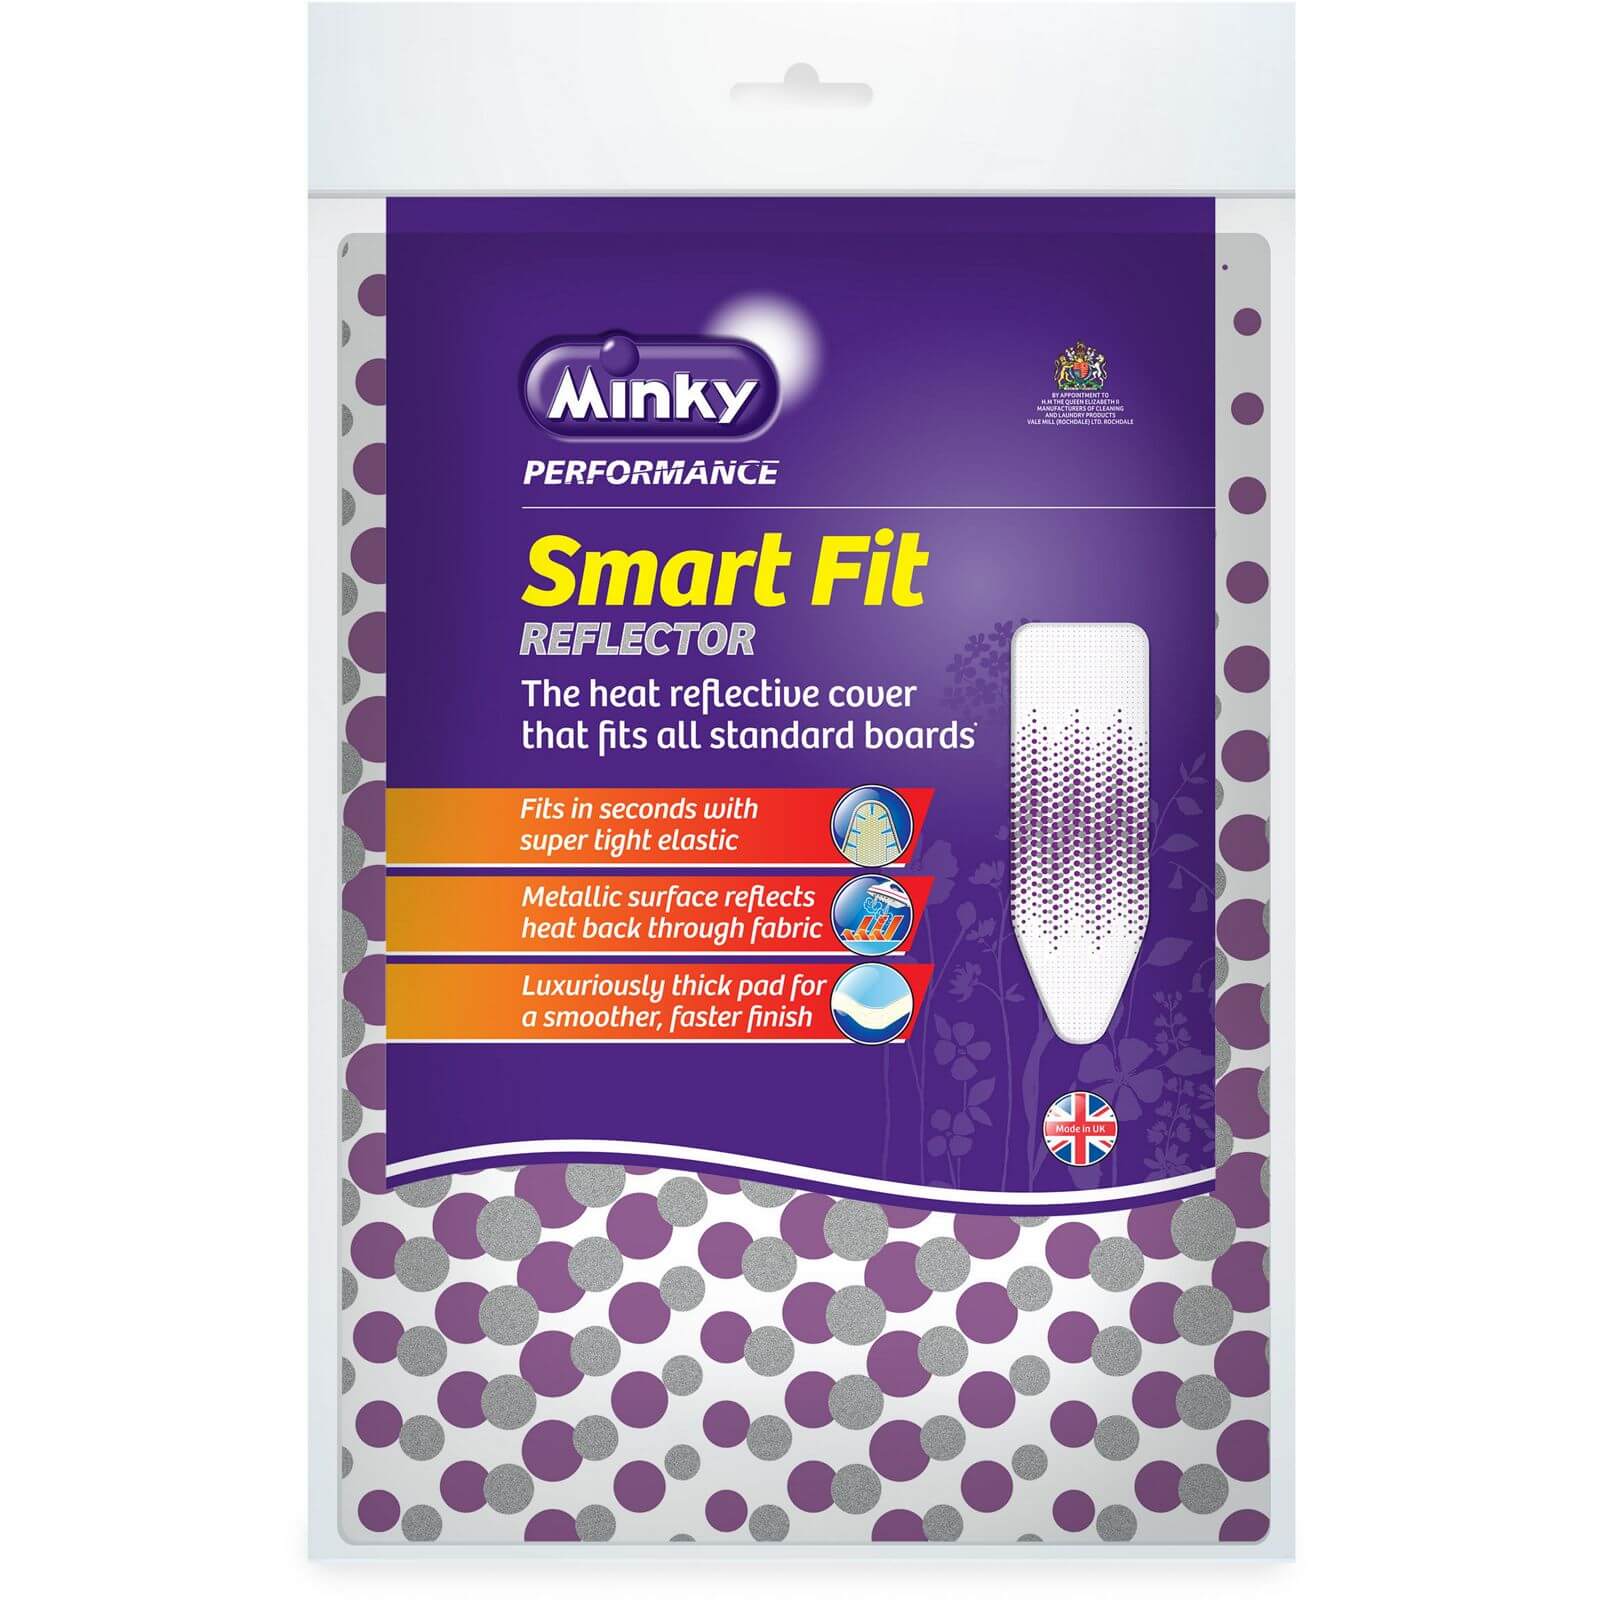 Photo of Minky Smart Fit Reflector Ironing Board Cover